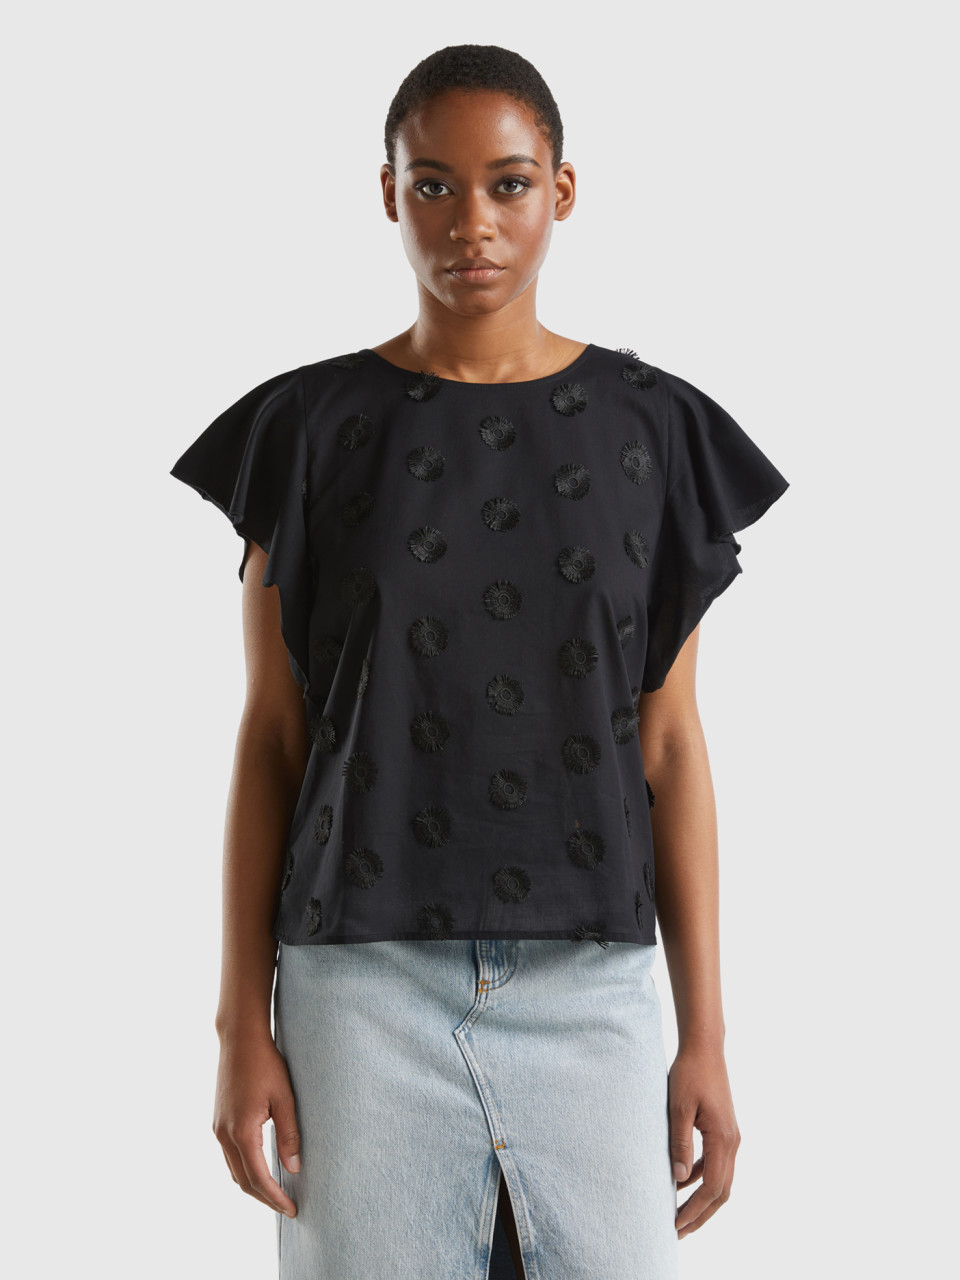 Benetton, T-shirt With Embroidered Flowers, Black, Women